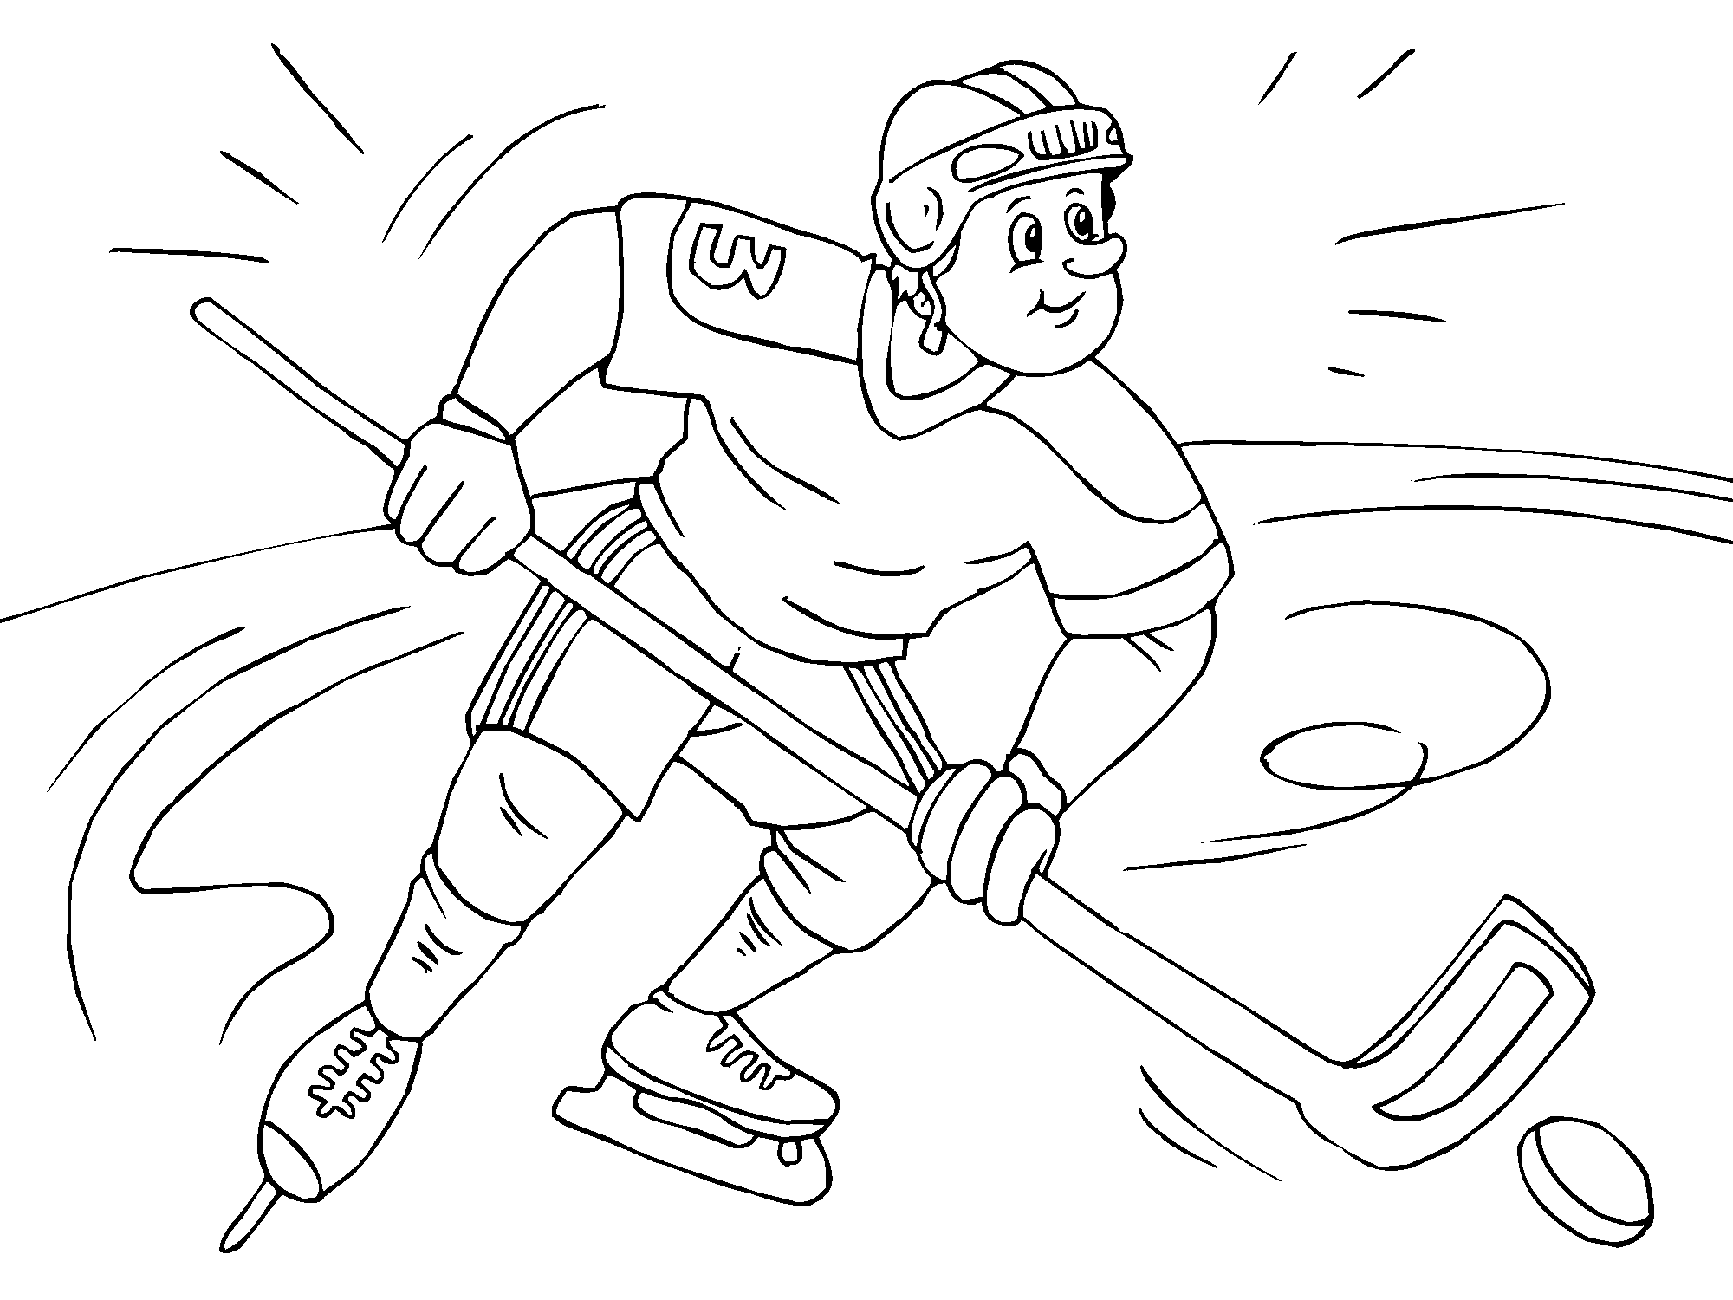 hockey-player-coloring-pages